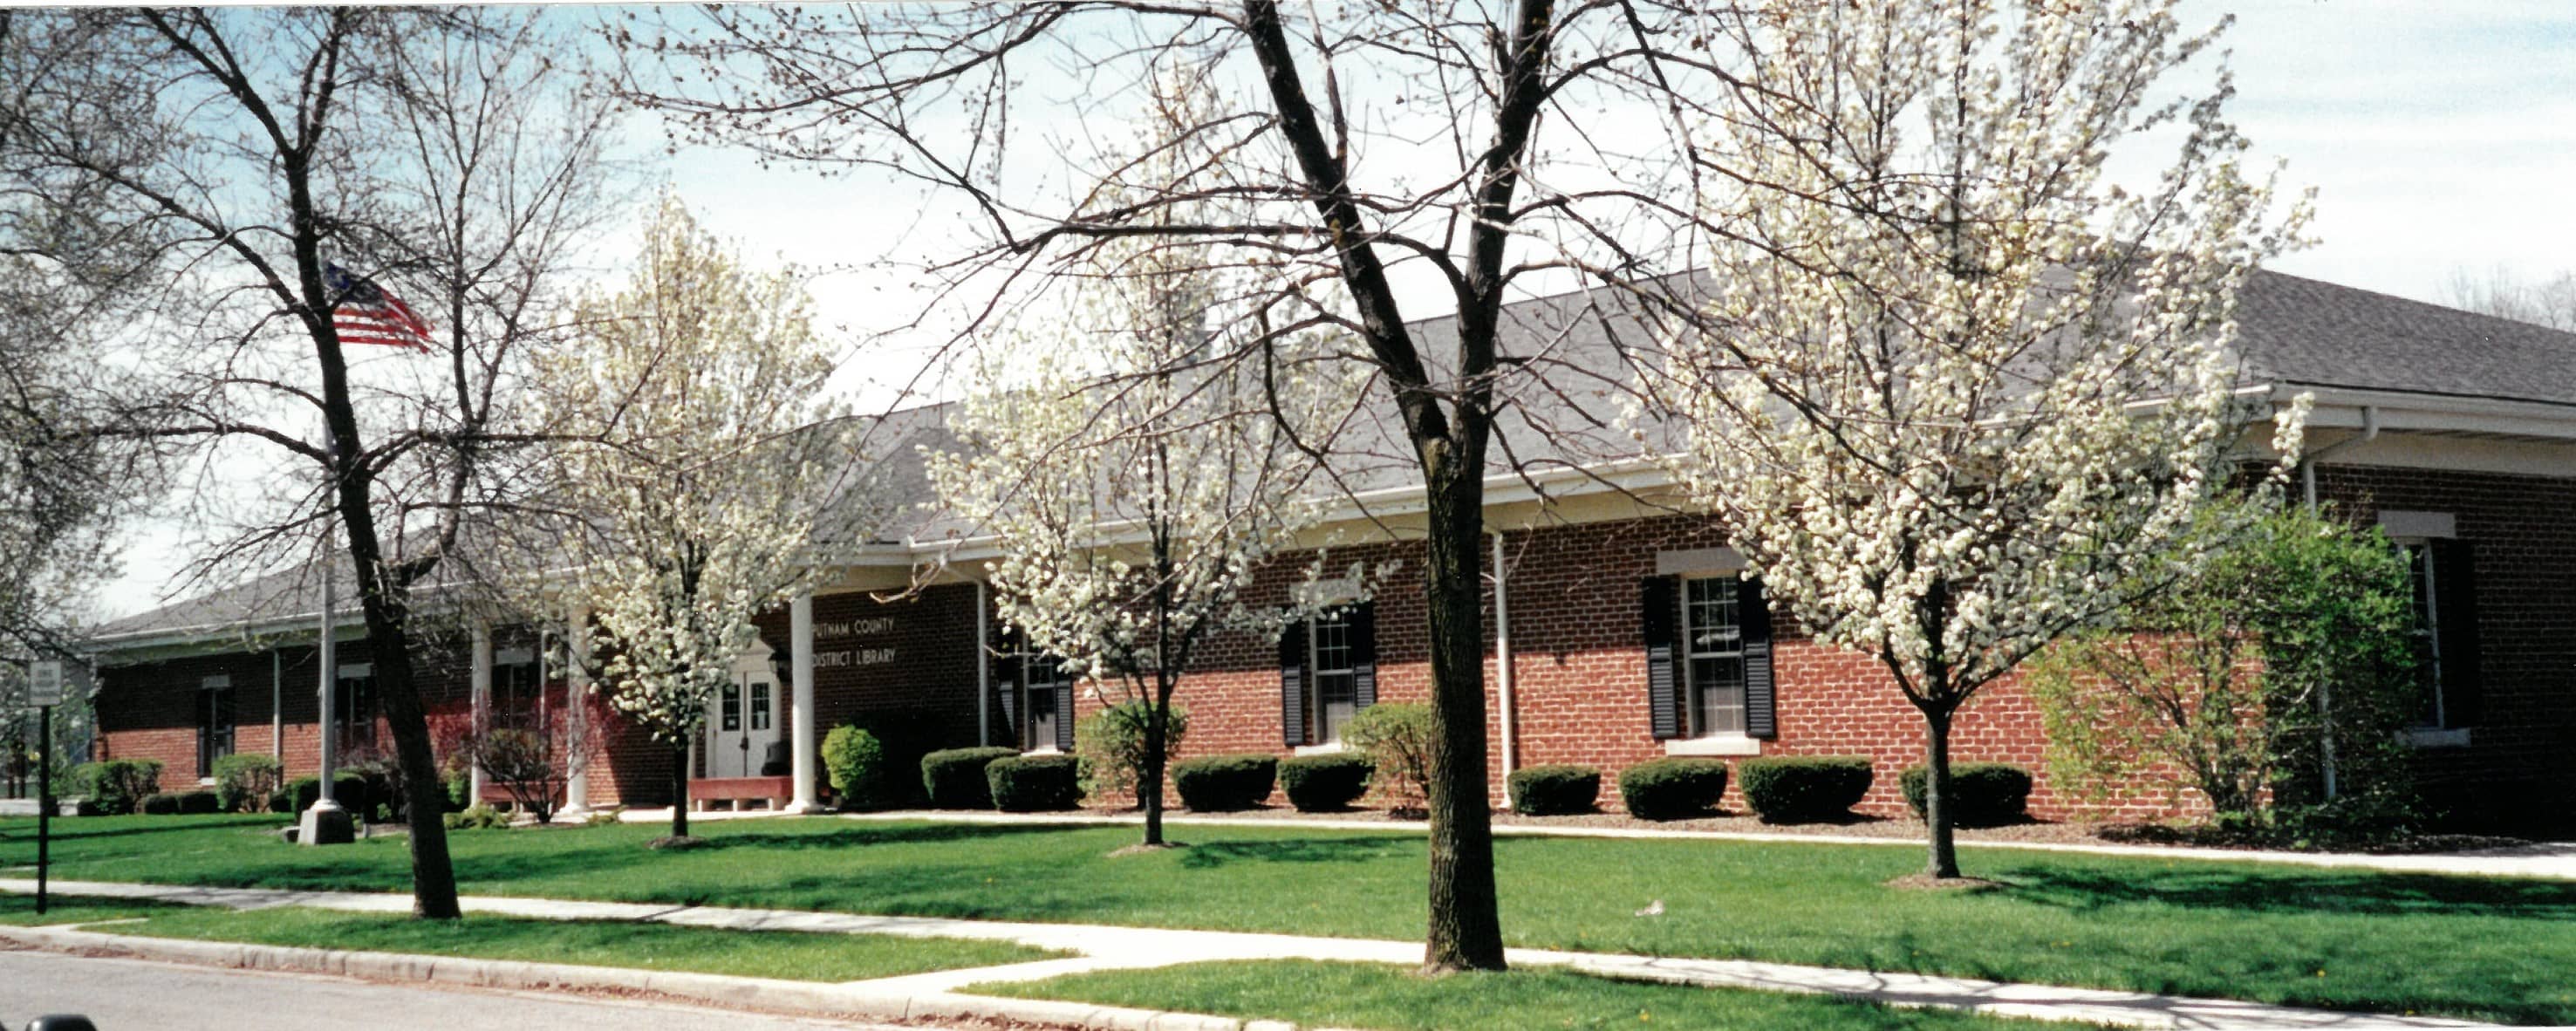 library building with flowering trees